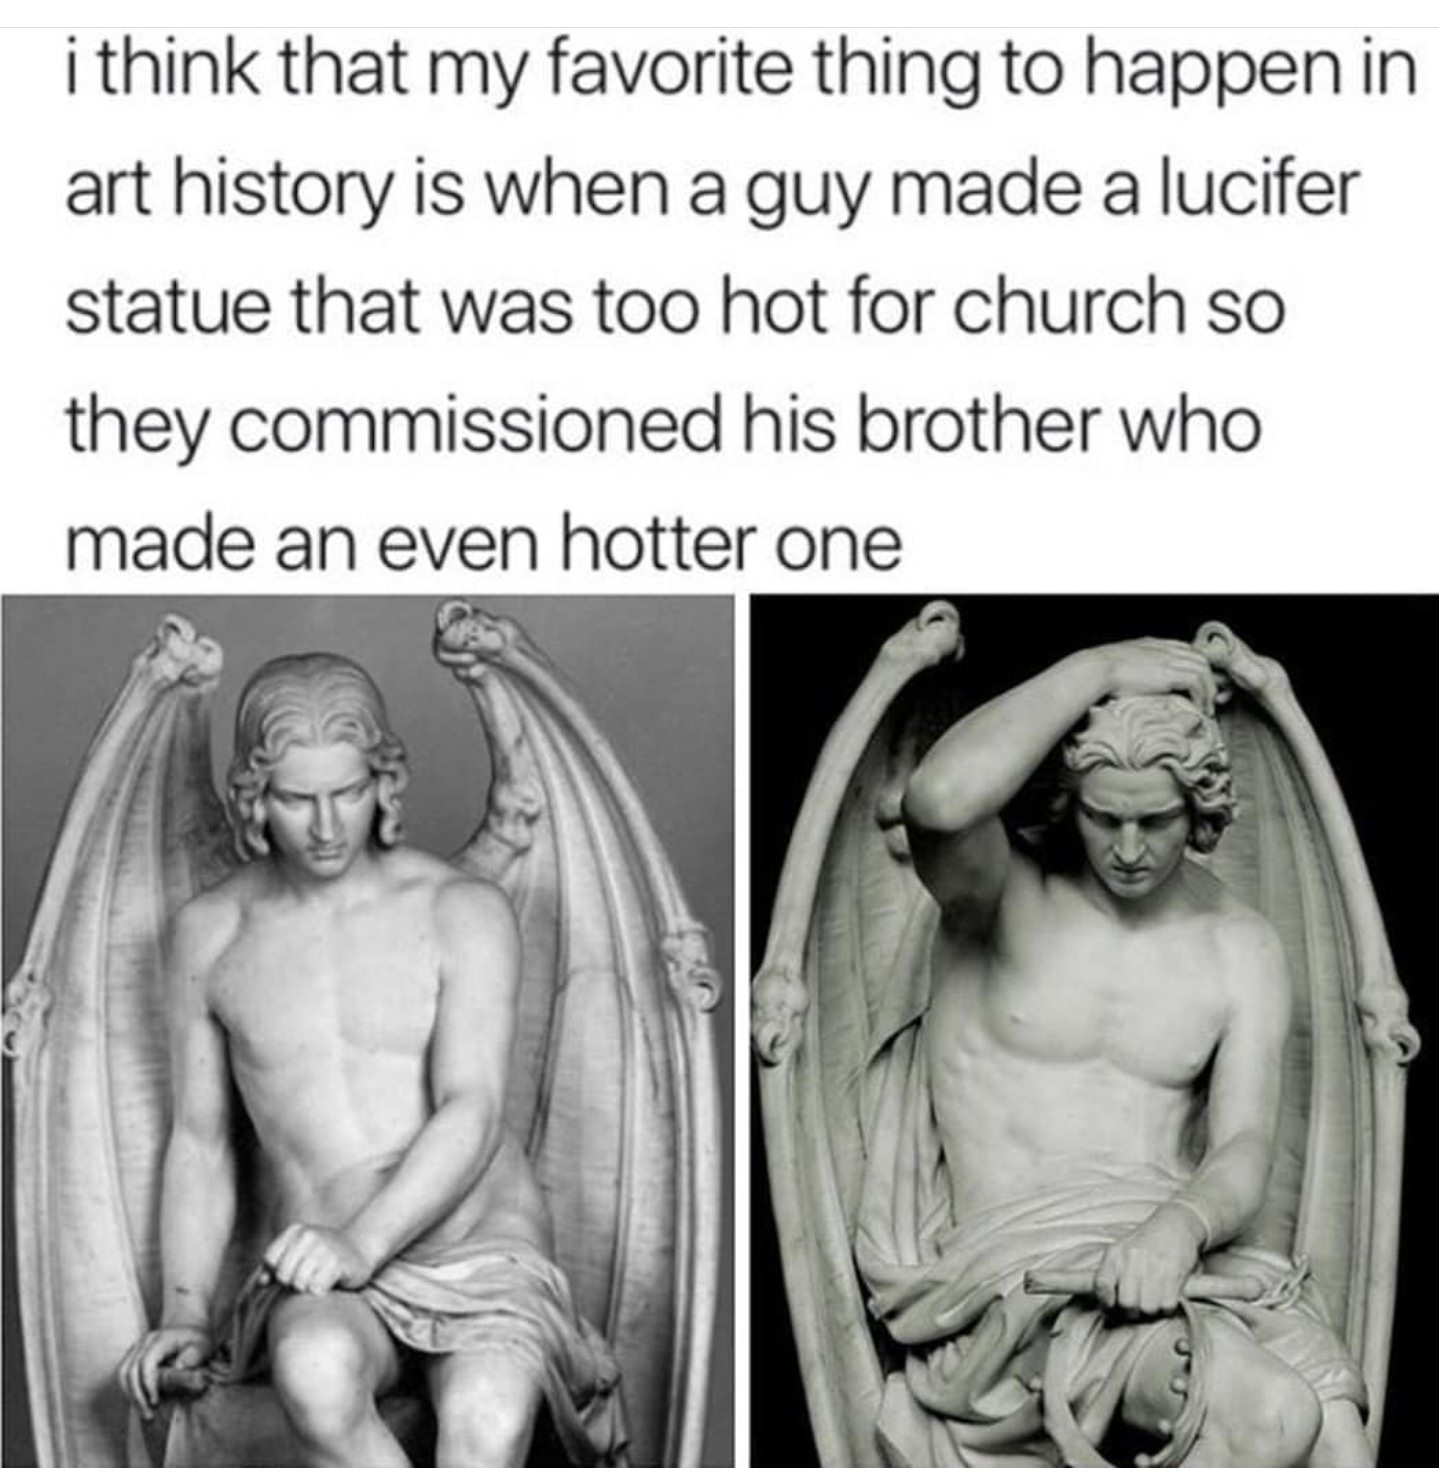 lucifer statue meme - i think that my favorite thing to happen in art history is when a guy made a lucifer statue that was too hot for church so they commissioned his brother who made an even hotter one